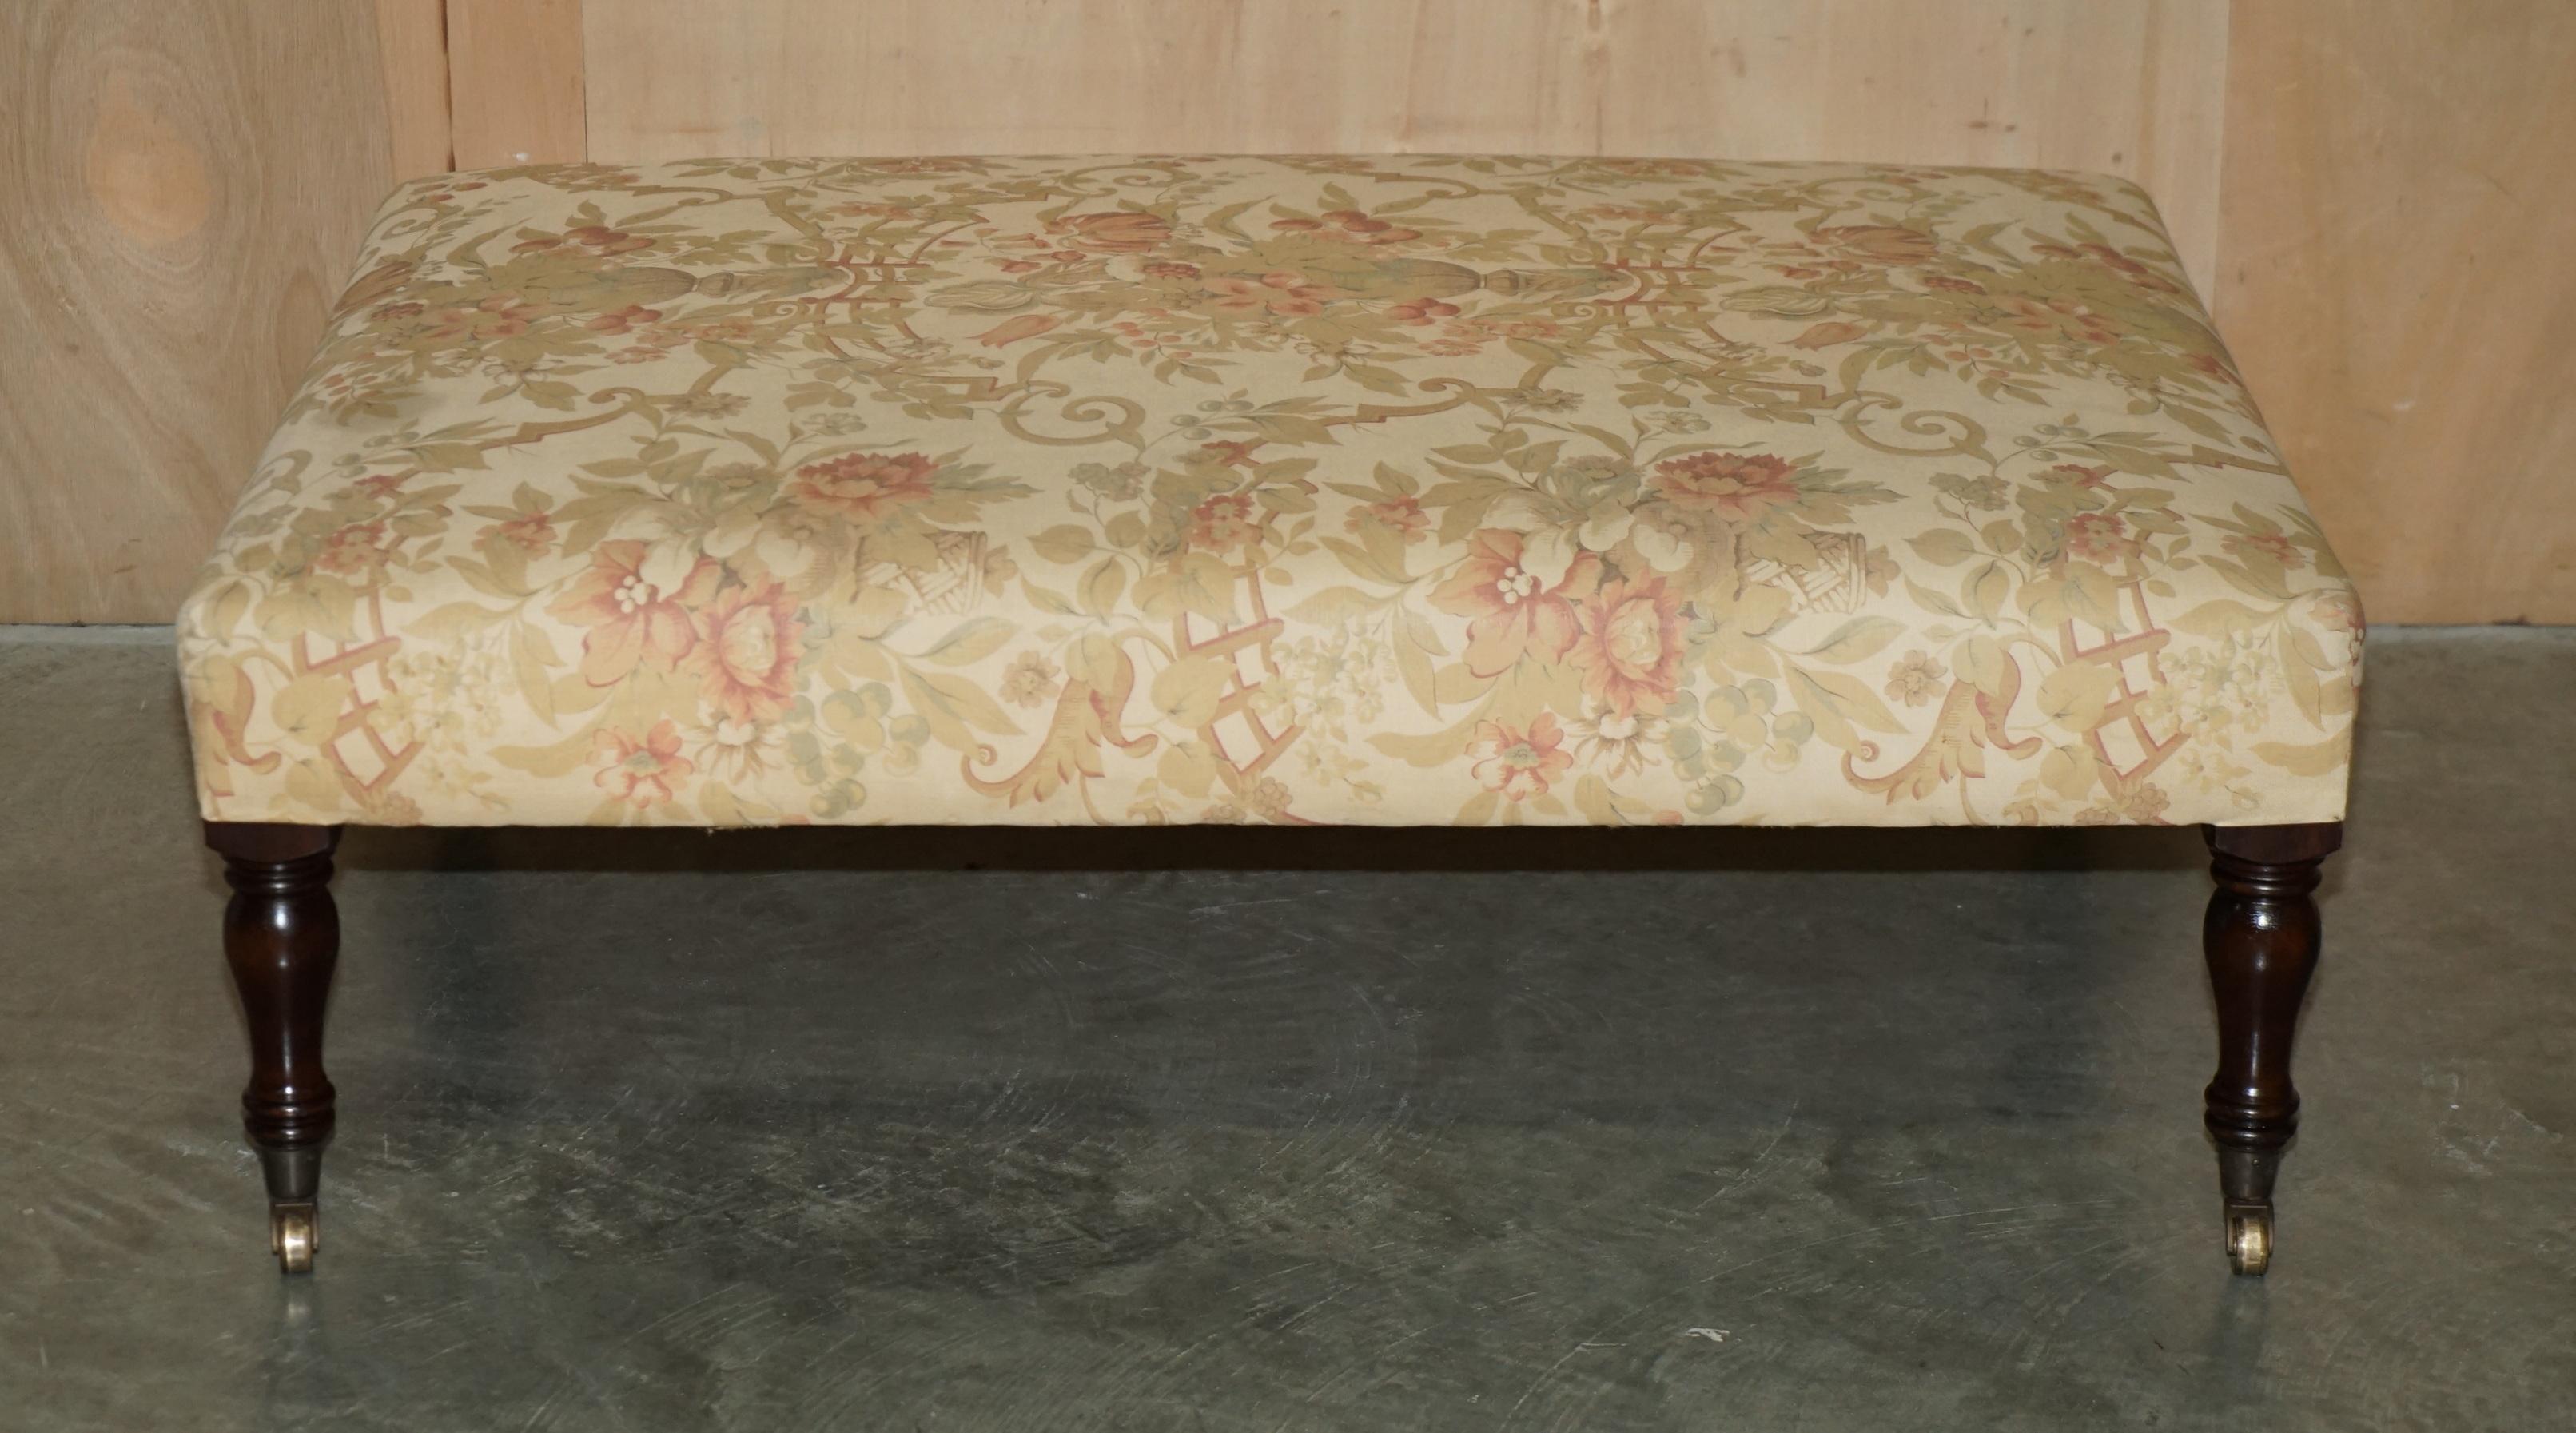 Royal House Antiques

Royal House Antiques is delighted to offer for sale this exquisite and highly collectable Vintage George Smith floral upholstered extra large footstool 

Please note the delivery fee listing is just a guide and covers London